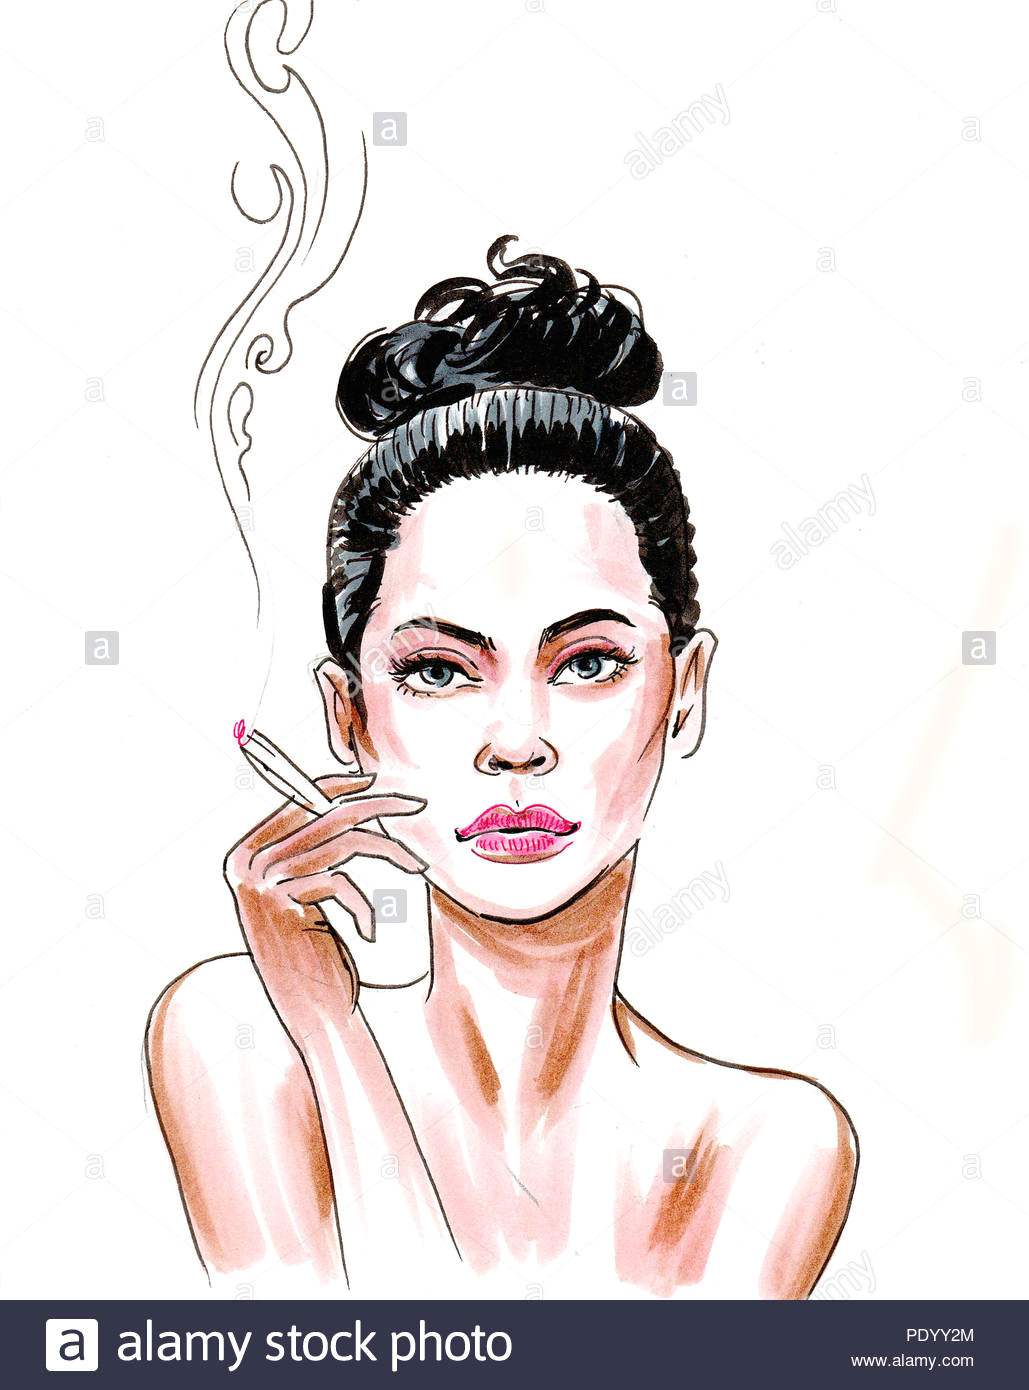 pretty woman with a smoking marijuana joint ink and watercolor illustration stock image